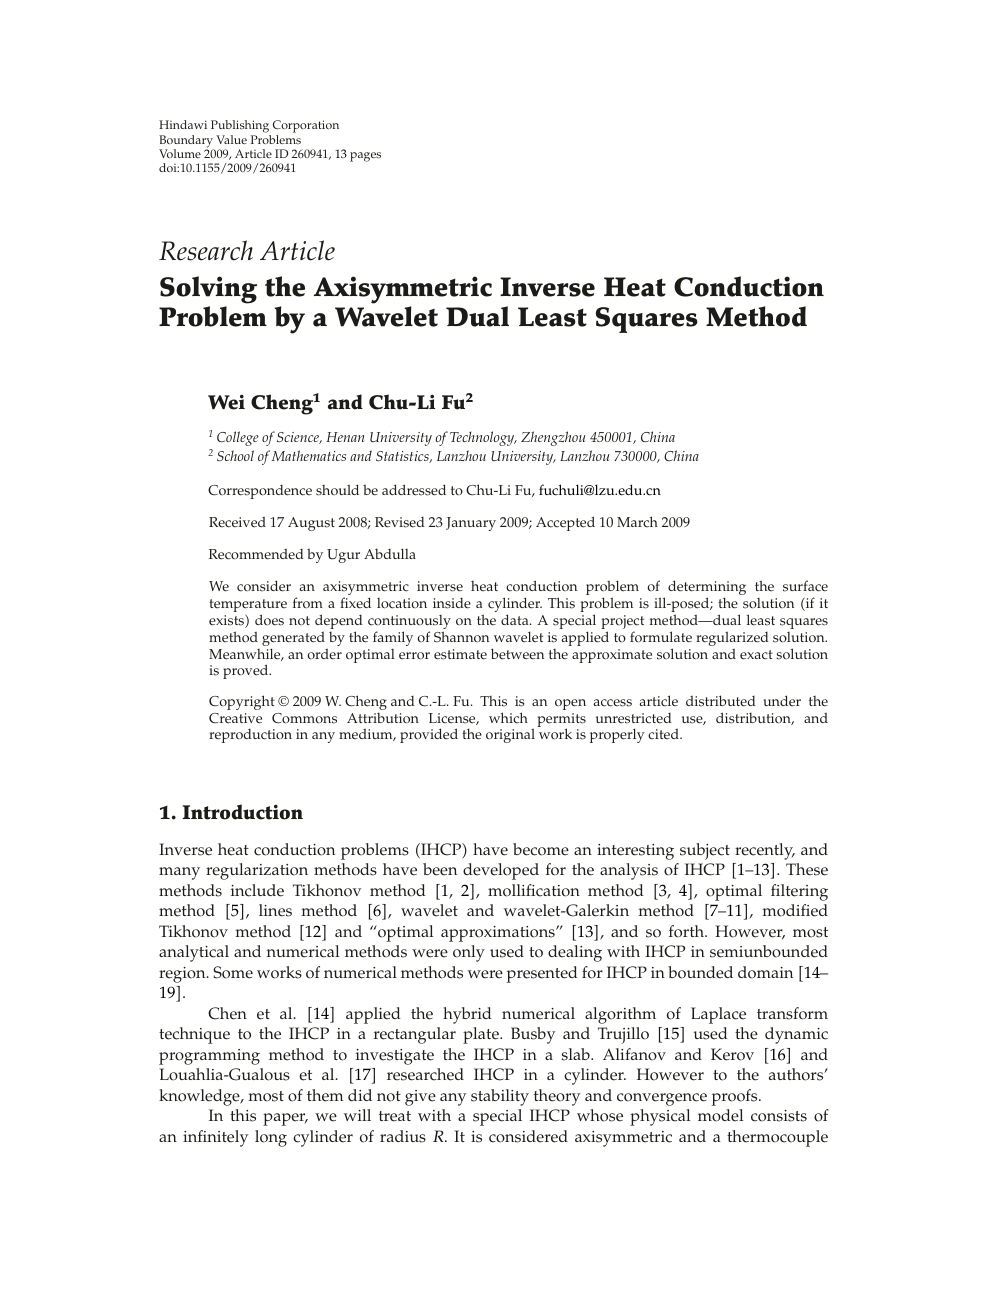 Solving The Axisymmetric Inverse Heat Conduction Problem By A Wavelet Dual Least Squares Method Topic Of Research Paper In Mathematics Download Scholarly Article Pdf And Read For Free On Cyberleninka Open